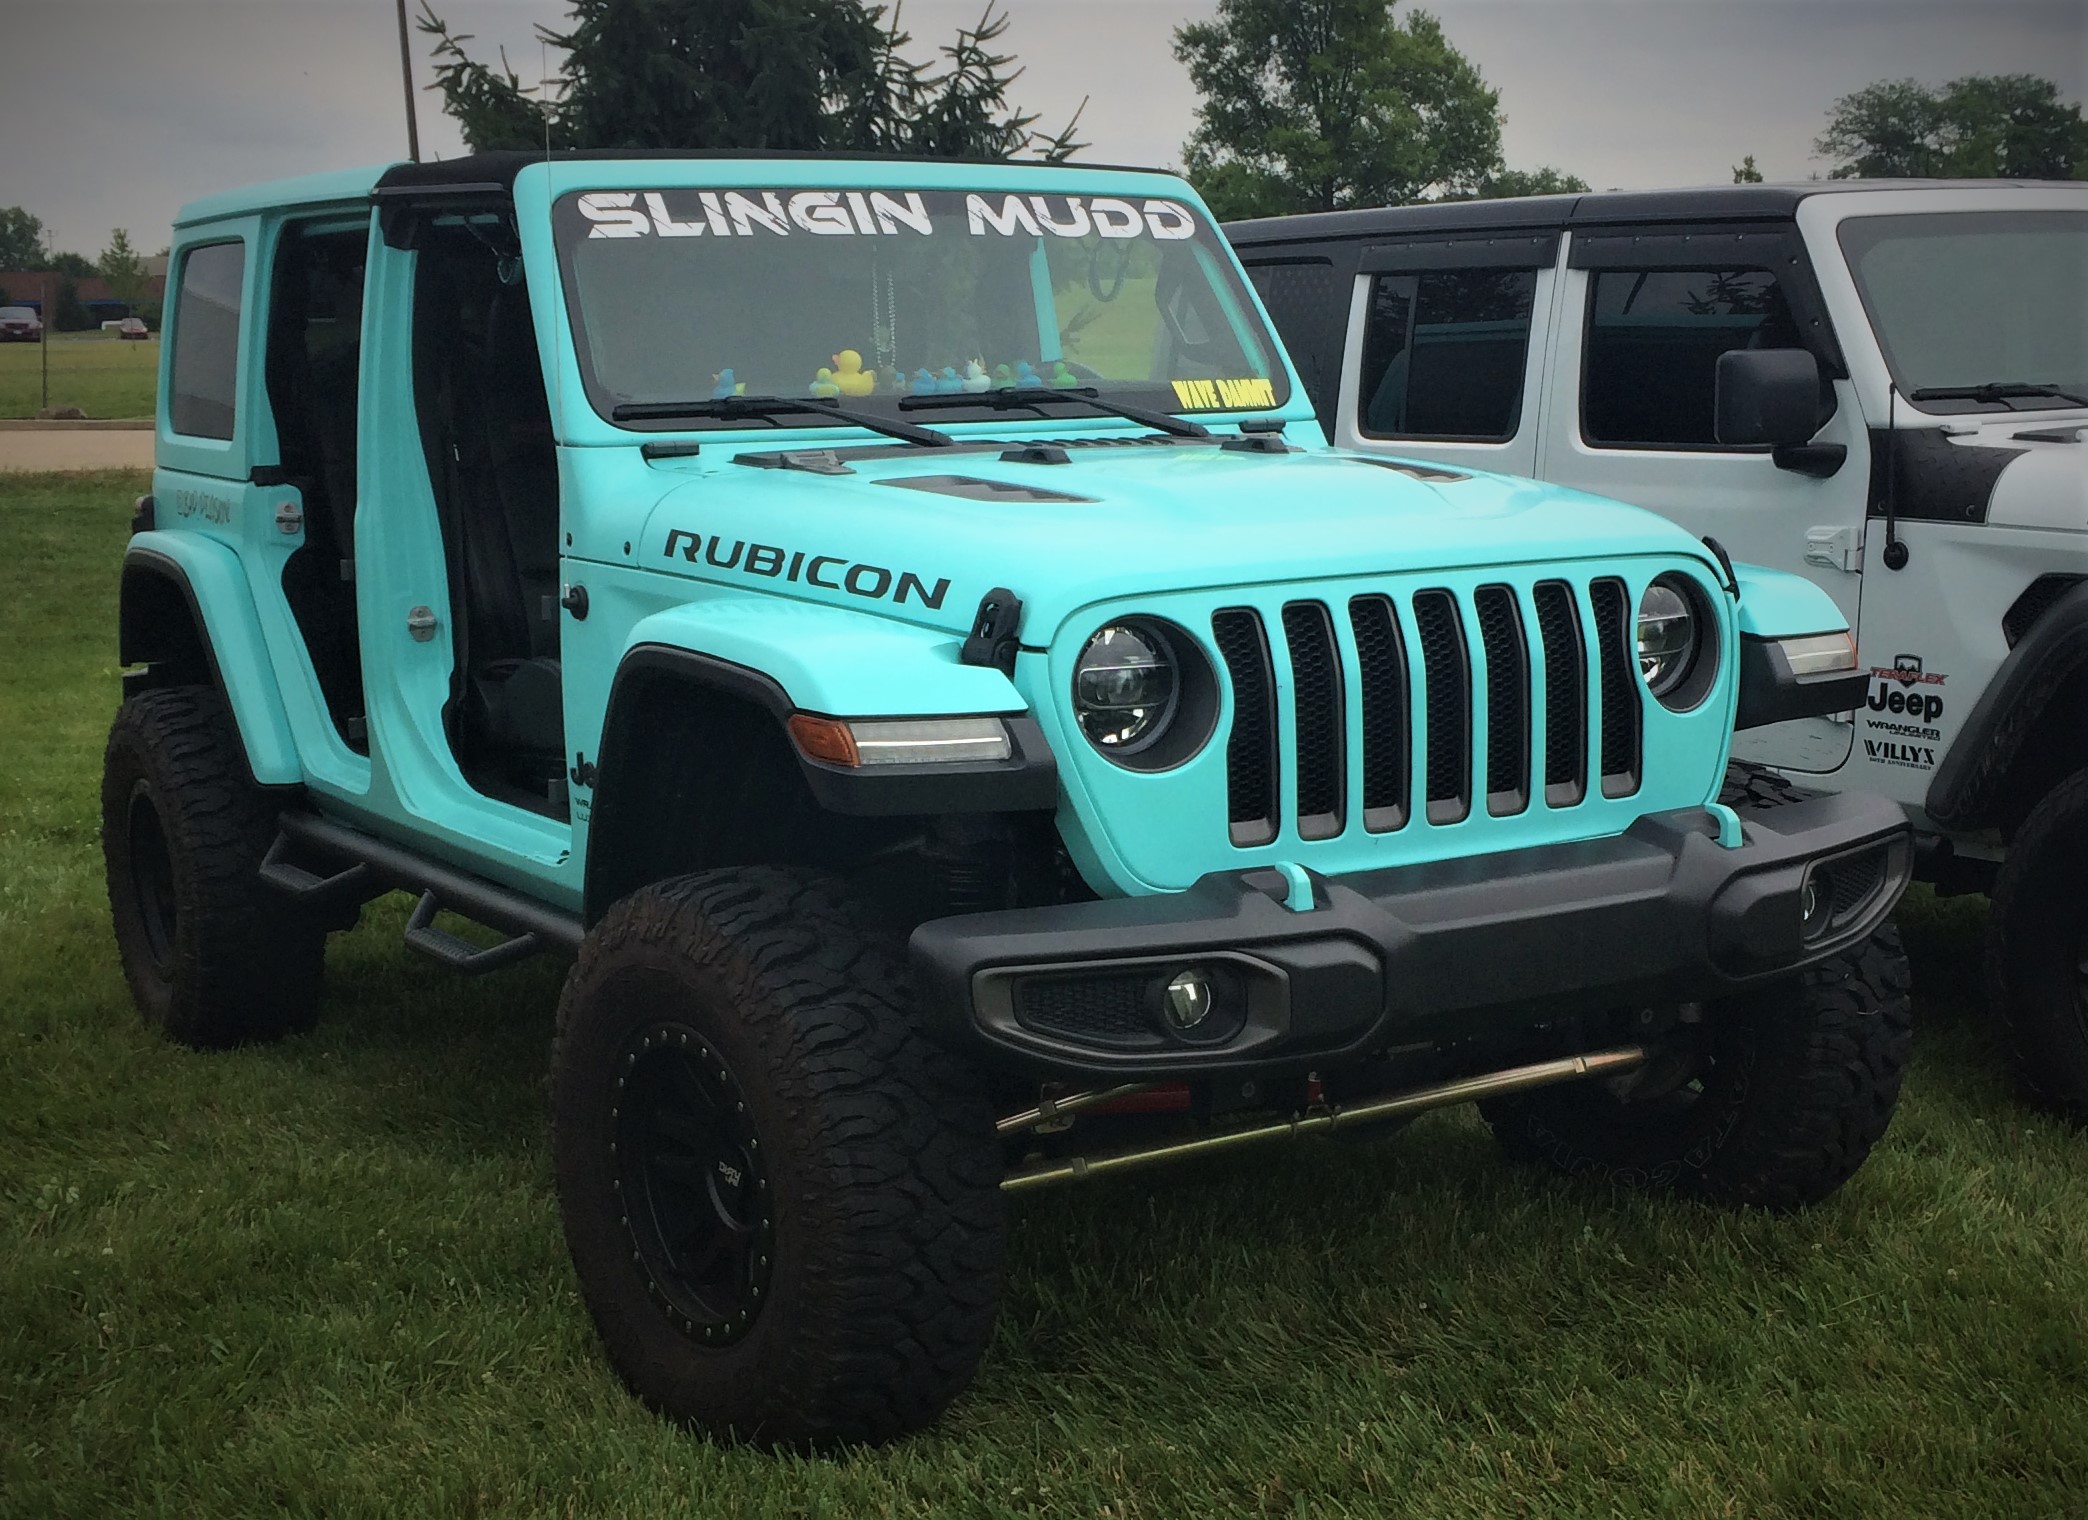 Photo Gallery: Jeep Mega Meet at the Bilstein North American Headquarters